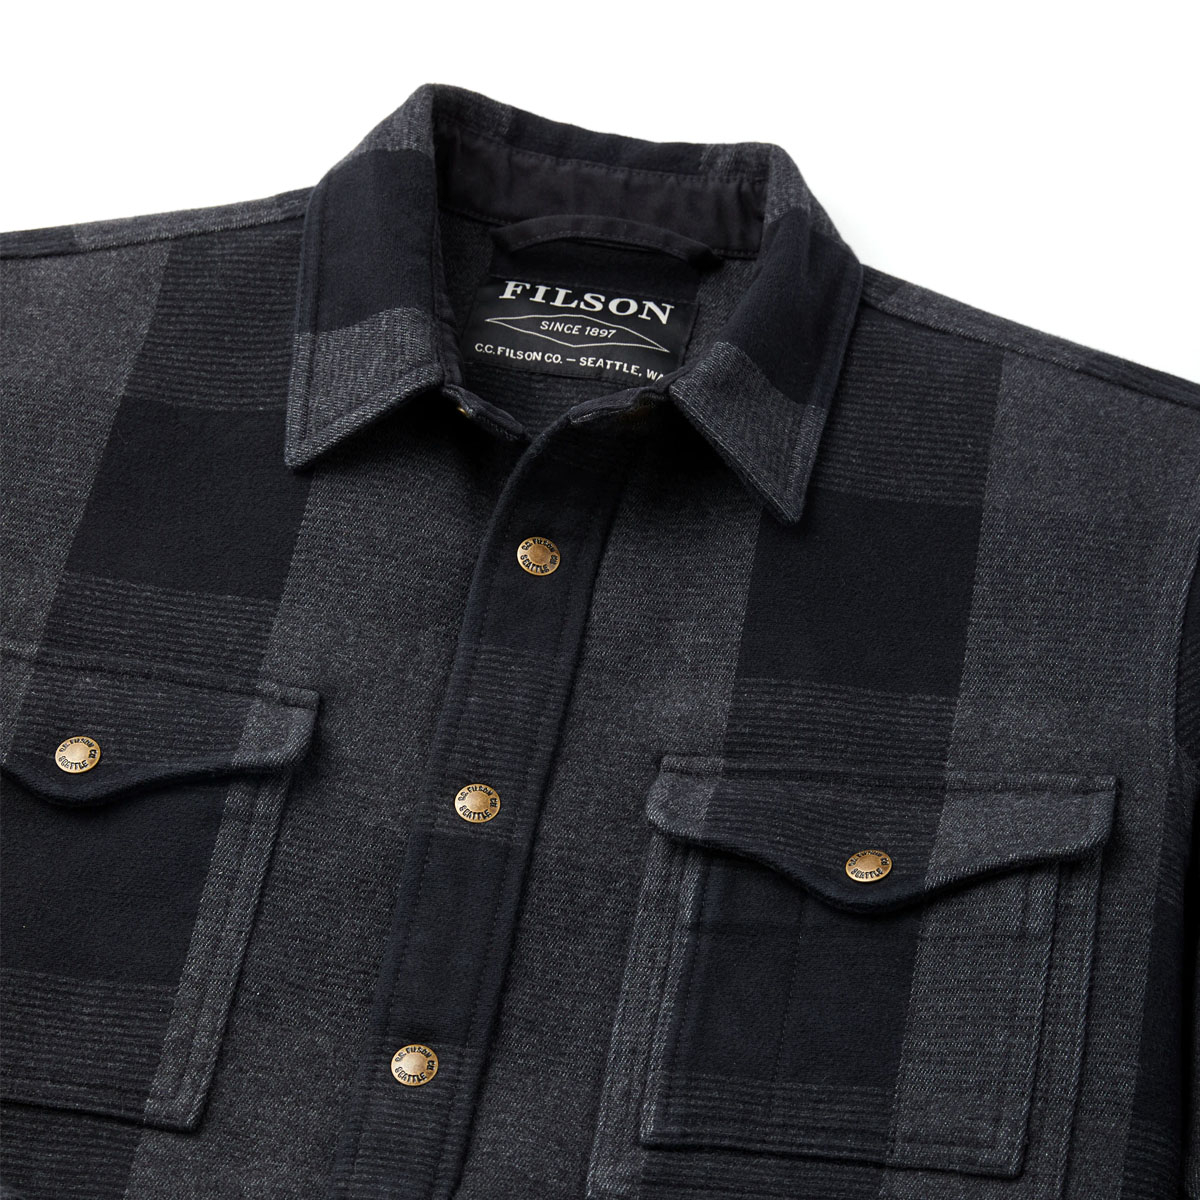 Filson Beartooth Camp Jacket Black/Gray Heather, built with thick and warm double-cloth cotton.